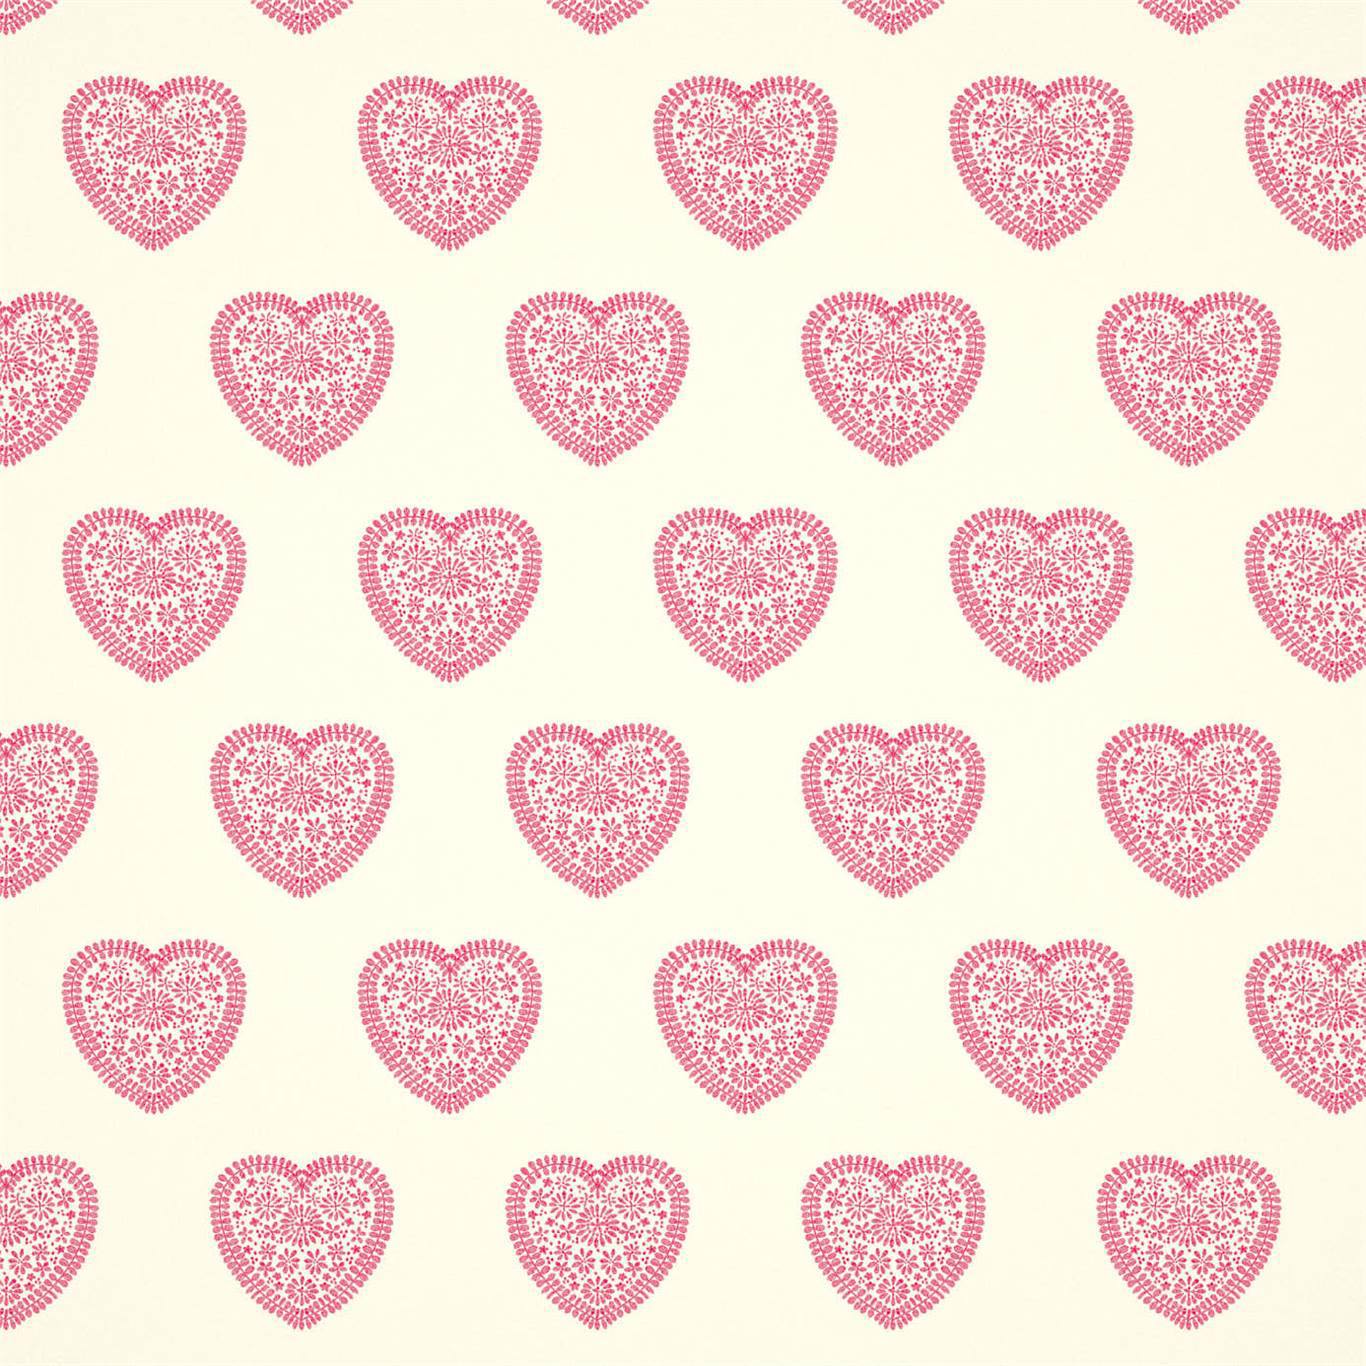 All About Me 110538 Sweet Hearts Pink Wallpaper HLTF112659 by Harlequin